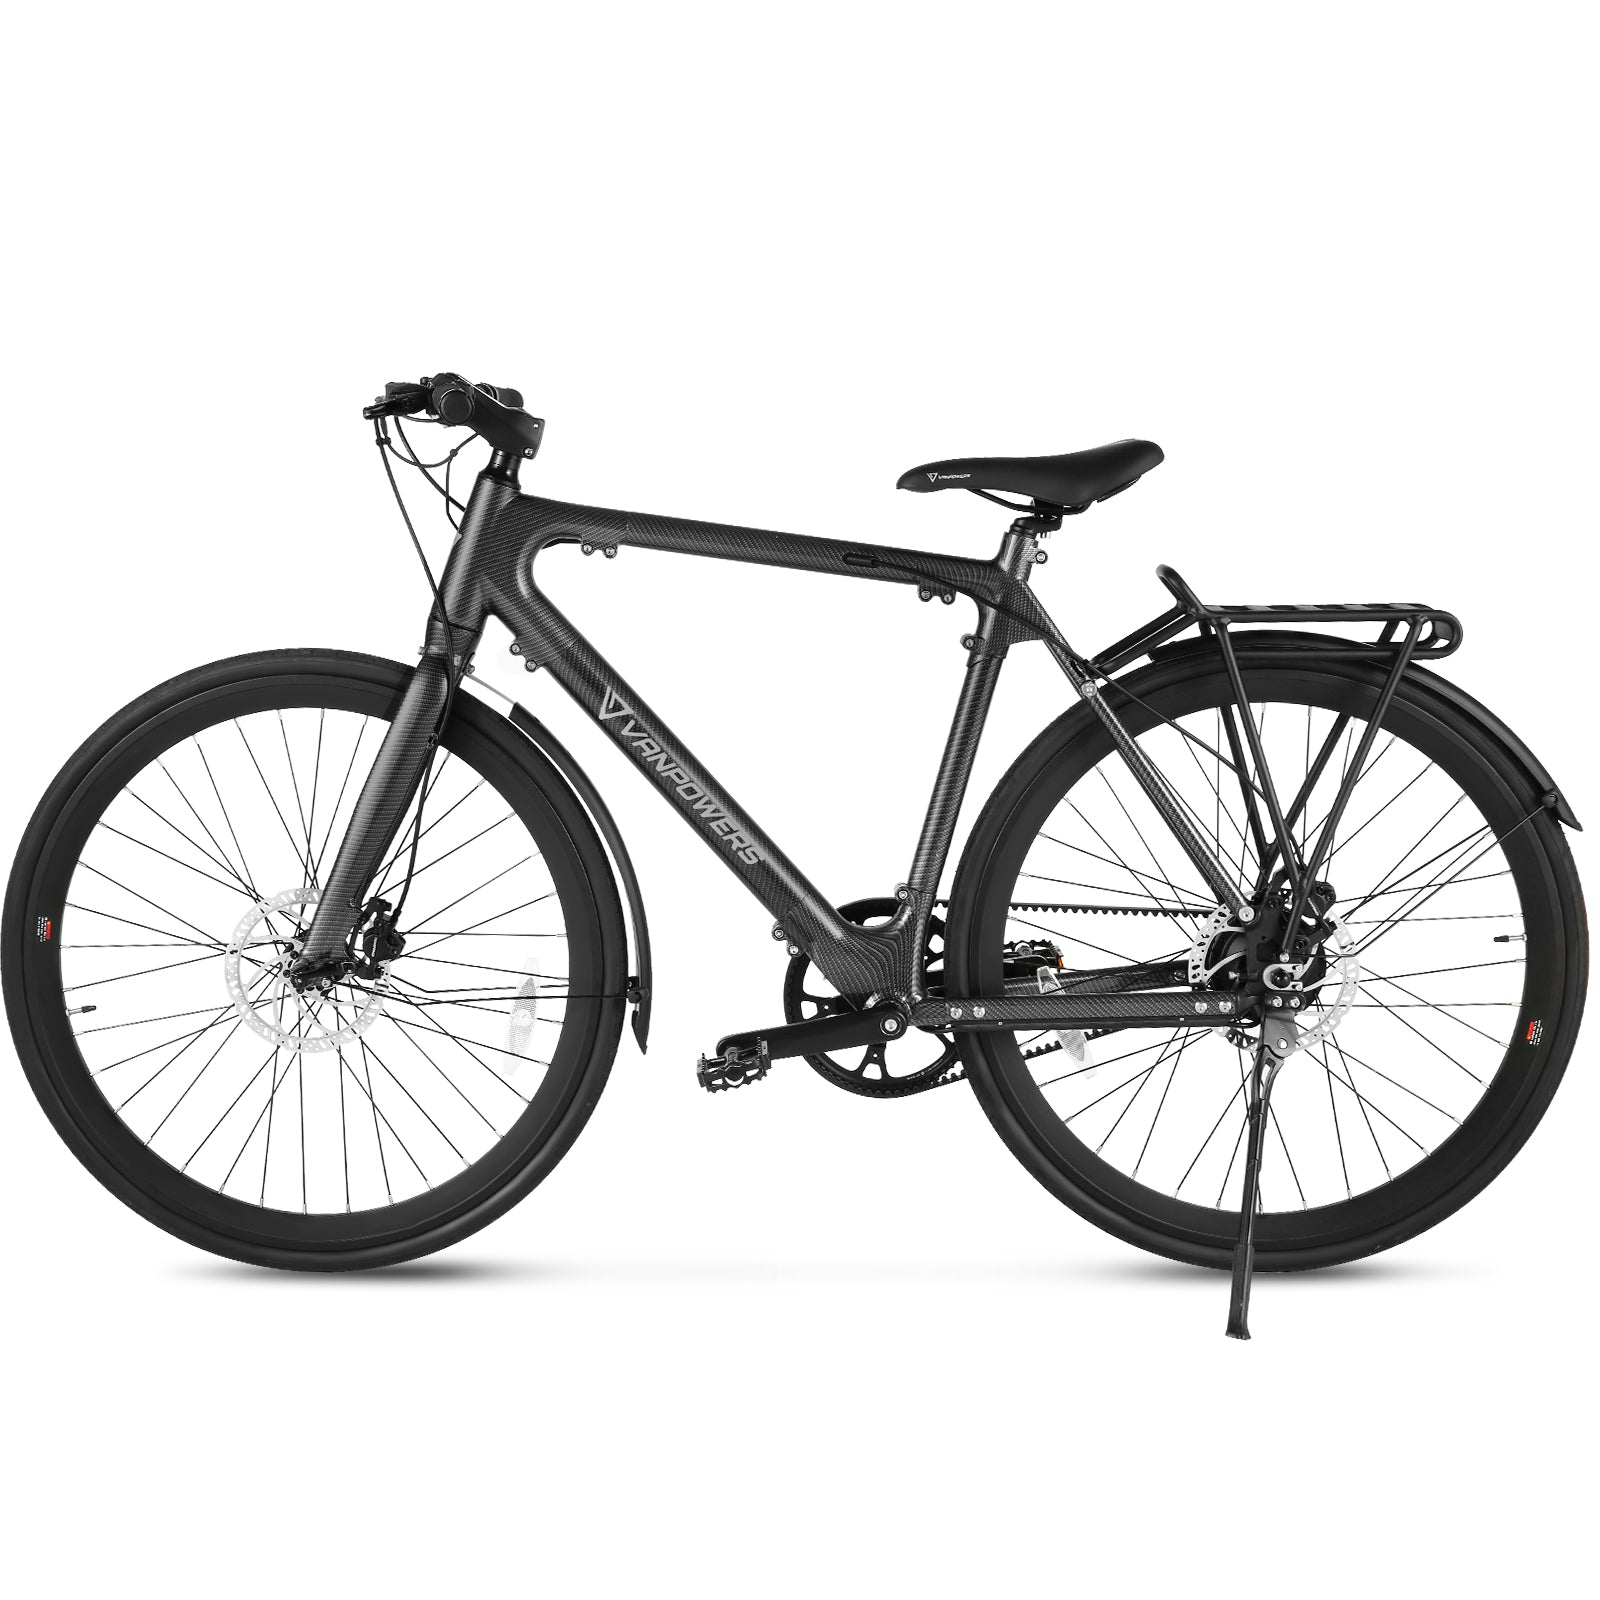 ebike Fender Set, weighing 0.2kg and measuring 62x7x20 cm, is crafted from durable aluminum alloy. It is specifically designed for compatibility with the City Vanture model, providing robust protection and a sleek look.